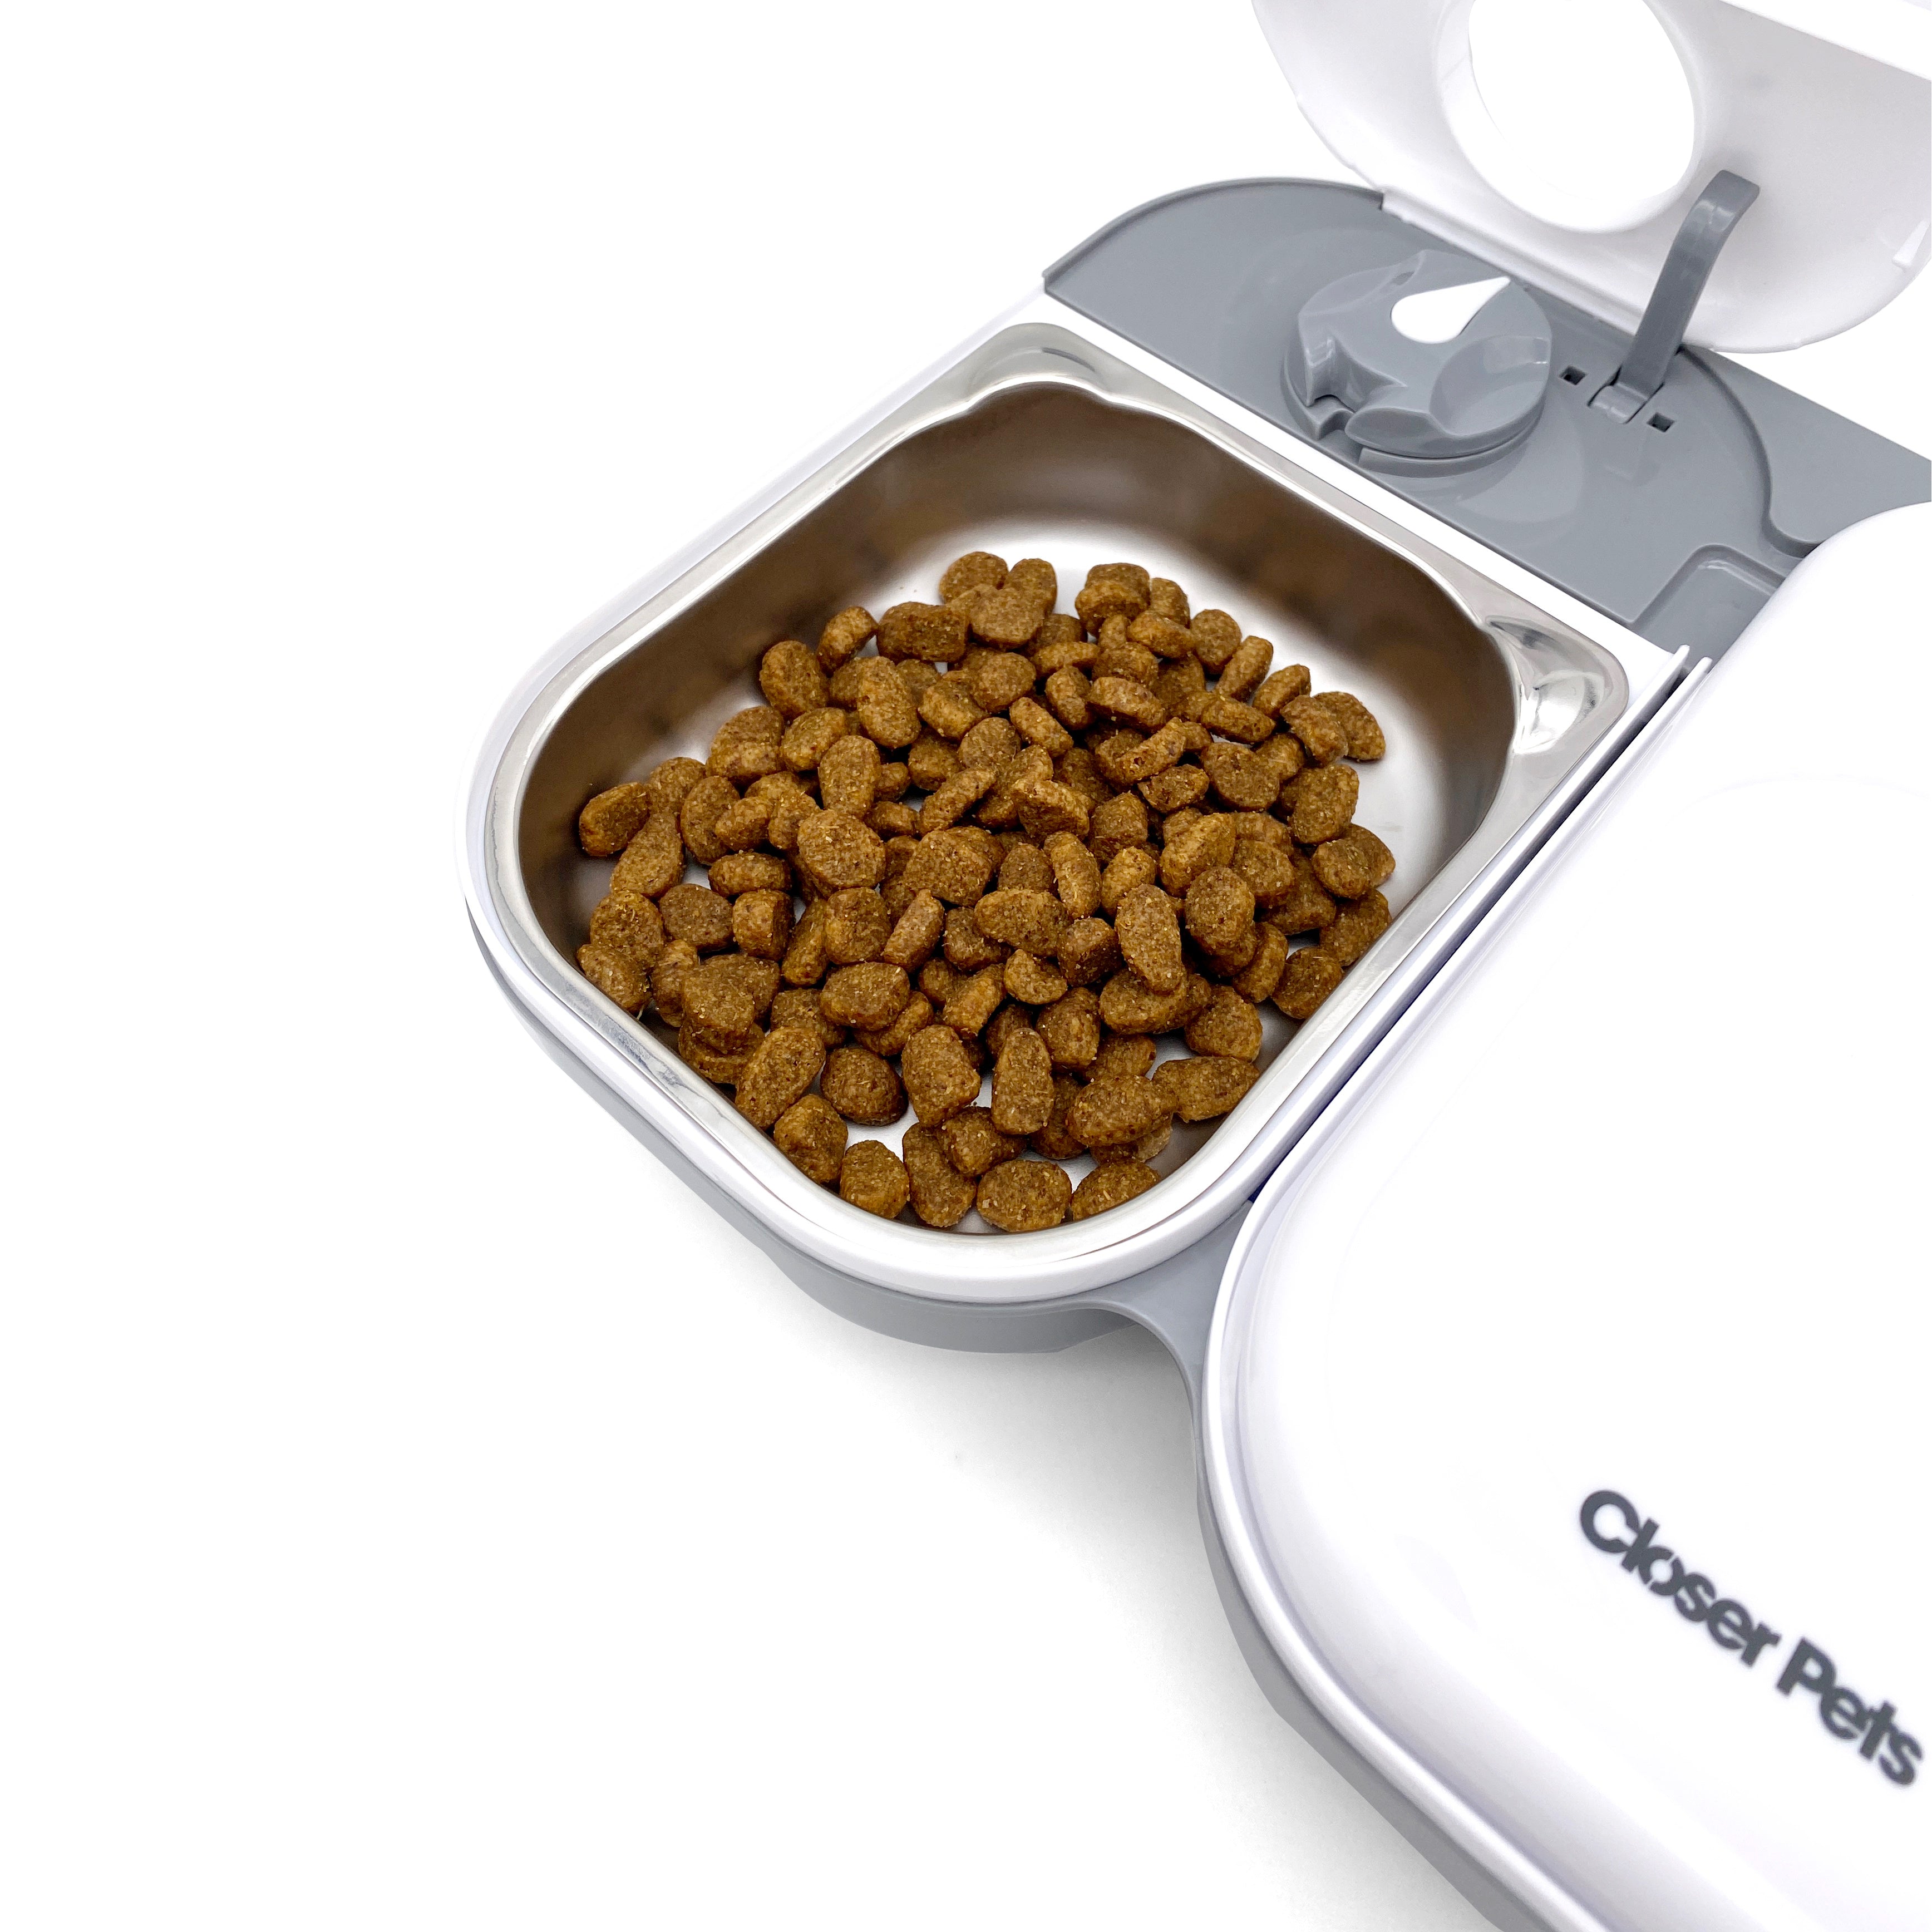 Closer Pets Two-Meal Automatic Dry/Wet Food Pet Feeder with Stainless Steel Bowl Inserts (C200)